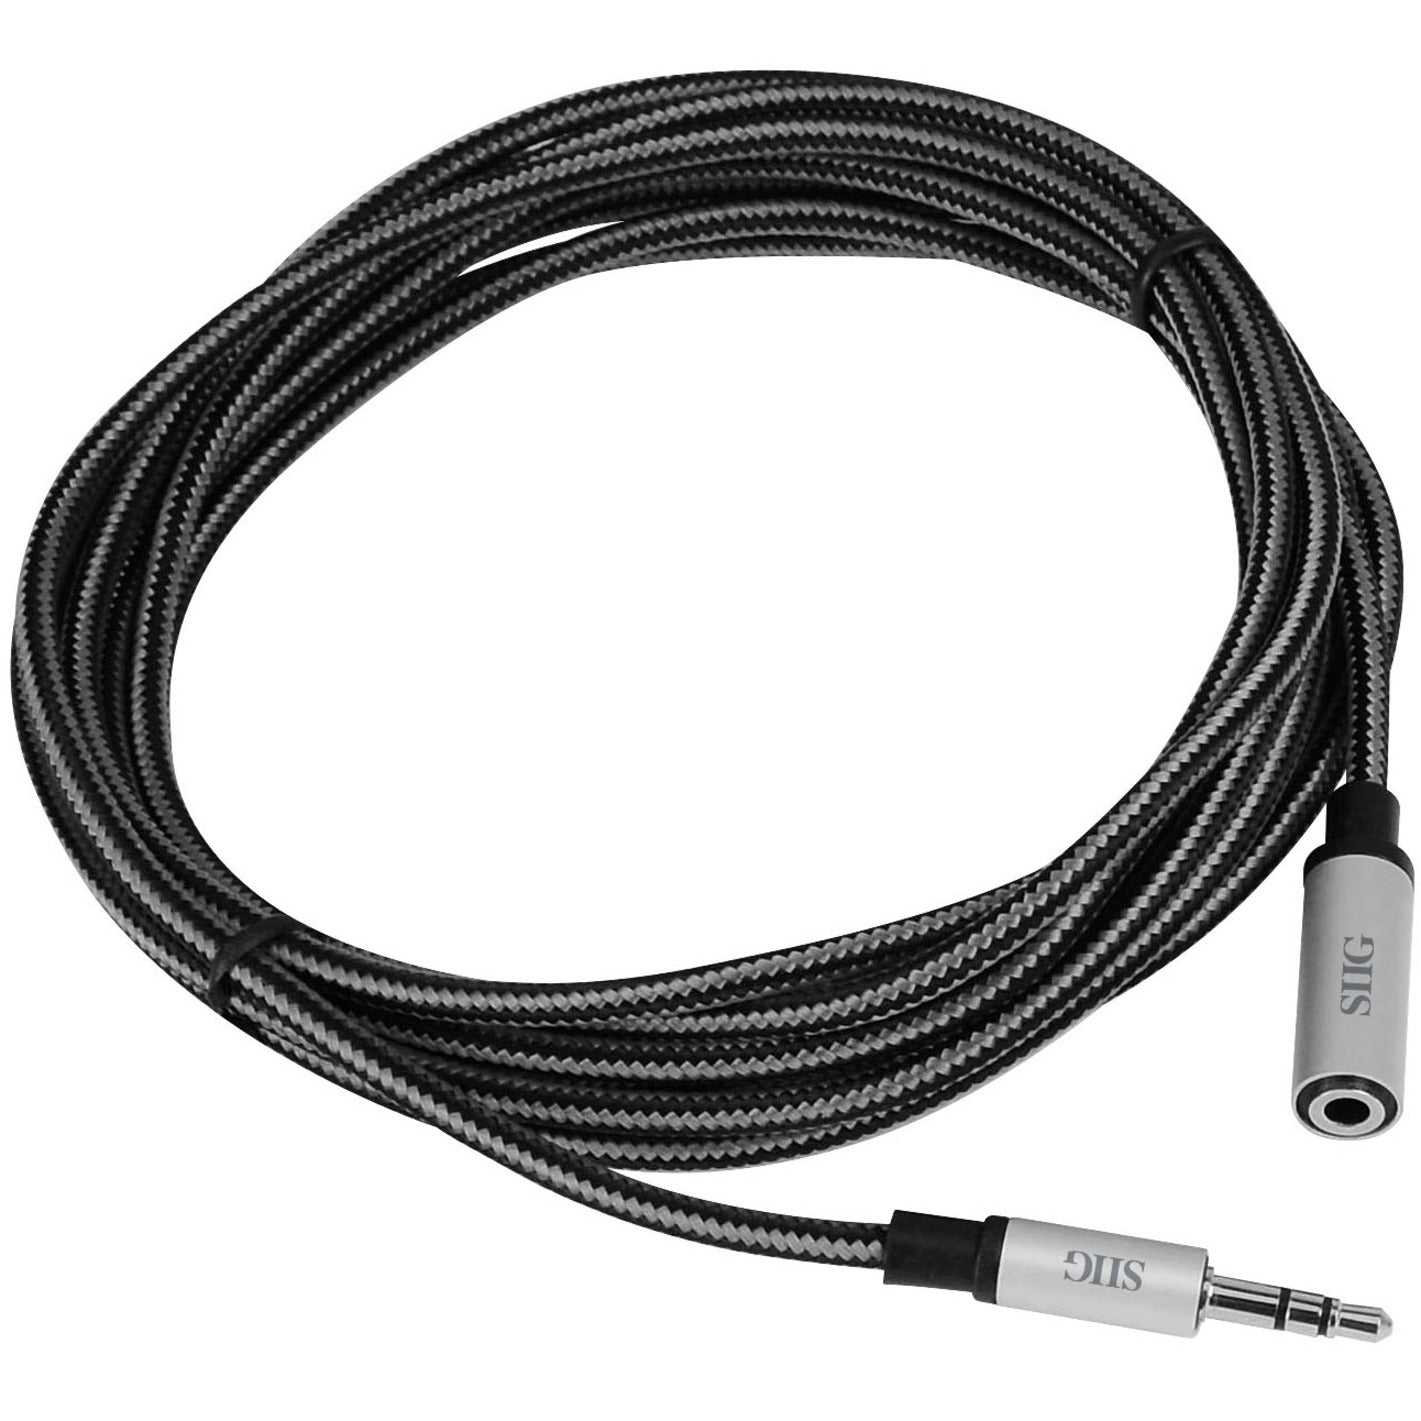 SIIG CB-AU0D12-S1 Woven Fabric Braided 3.5mm Stereo Aux Cable (M/F) - 3M, Tangle-Free, Loss-Less Audio, Durable